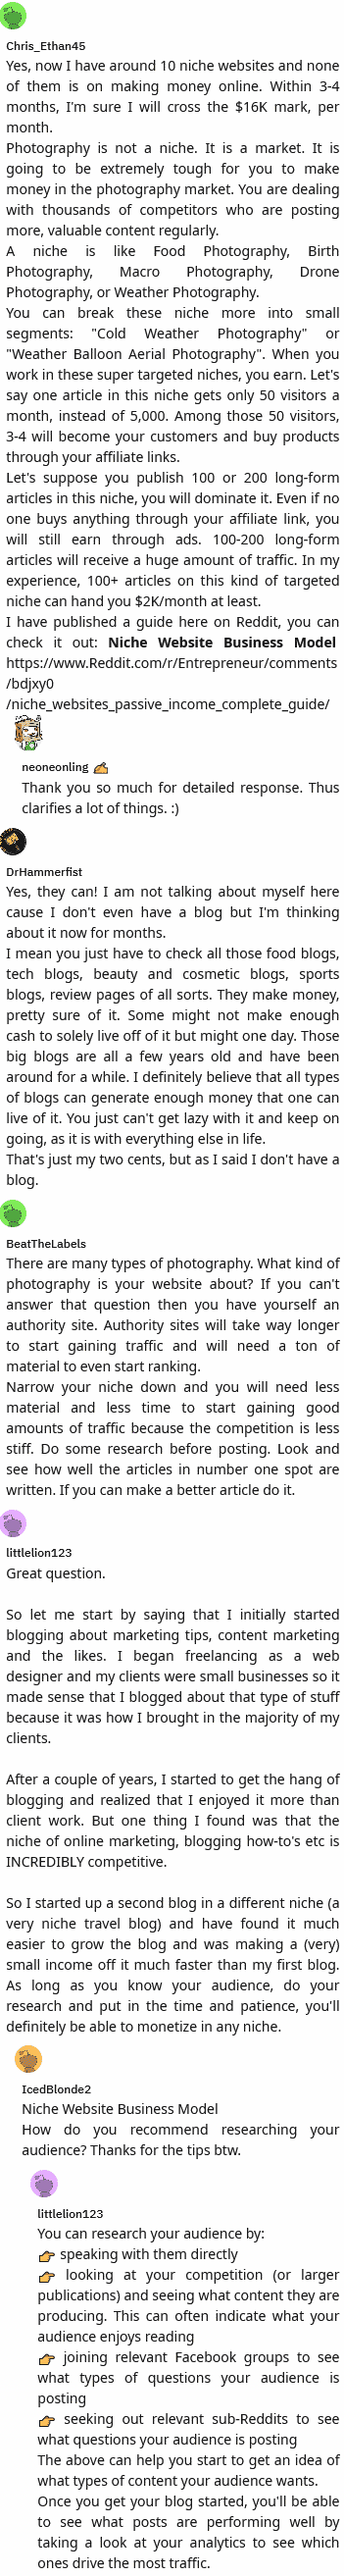 to make money with blogging in photography